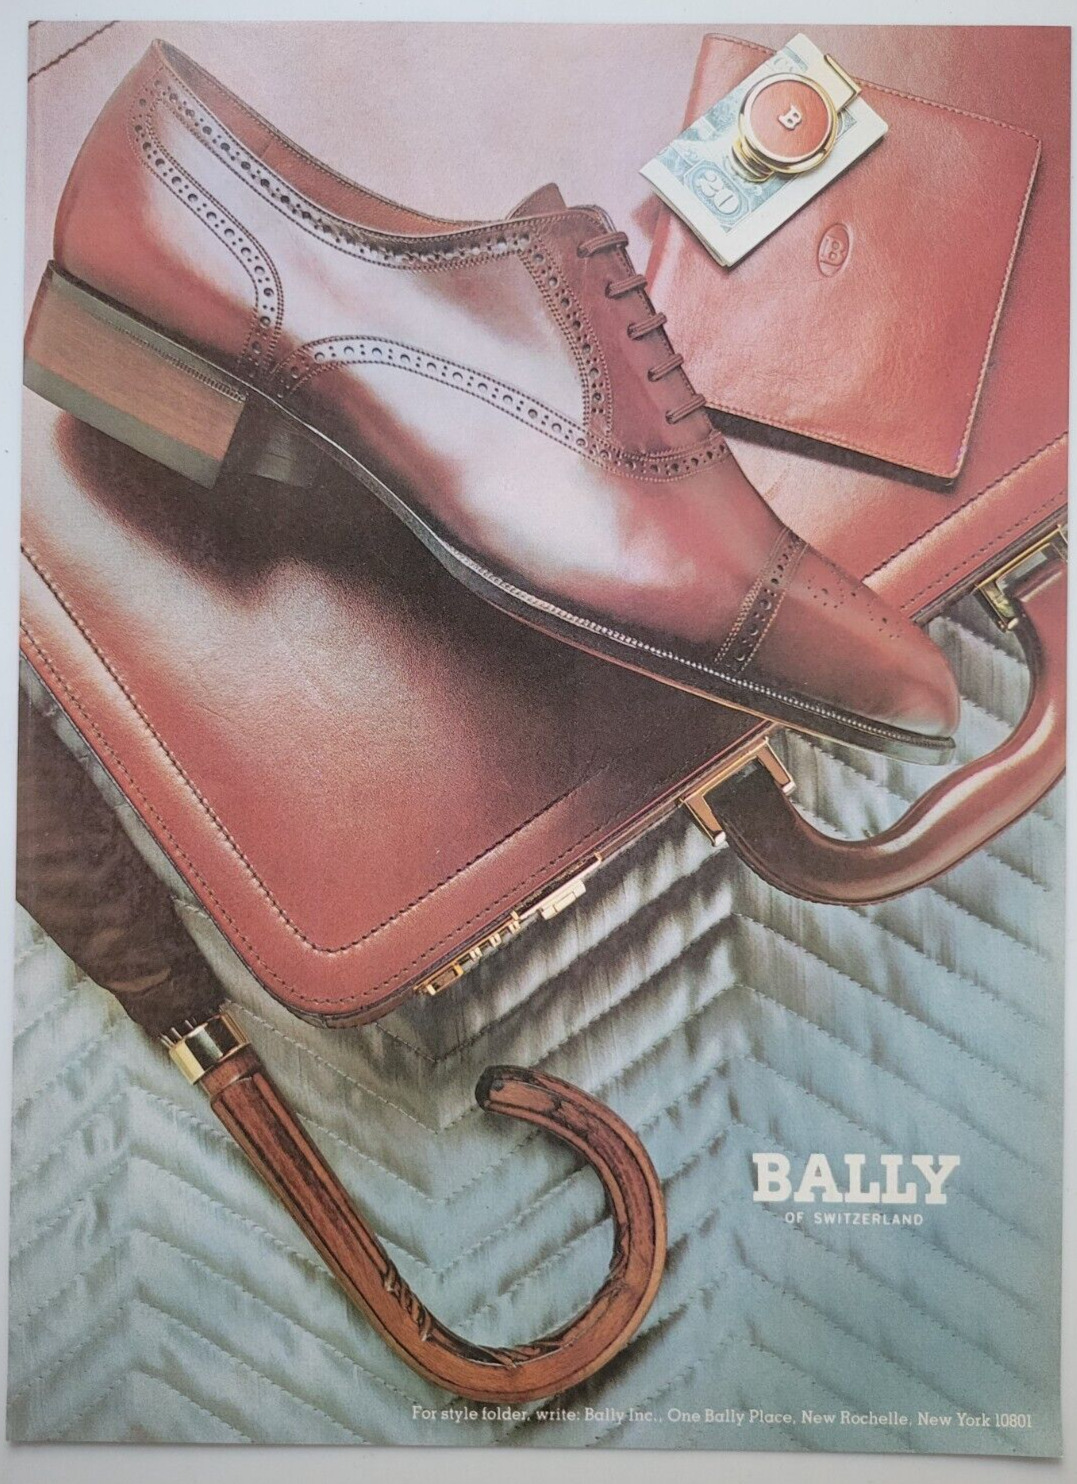 Bally Switzerland Accessories Shoes Wallet 1982 New Yorker Print Ad 8x10.5